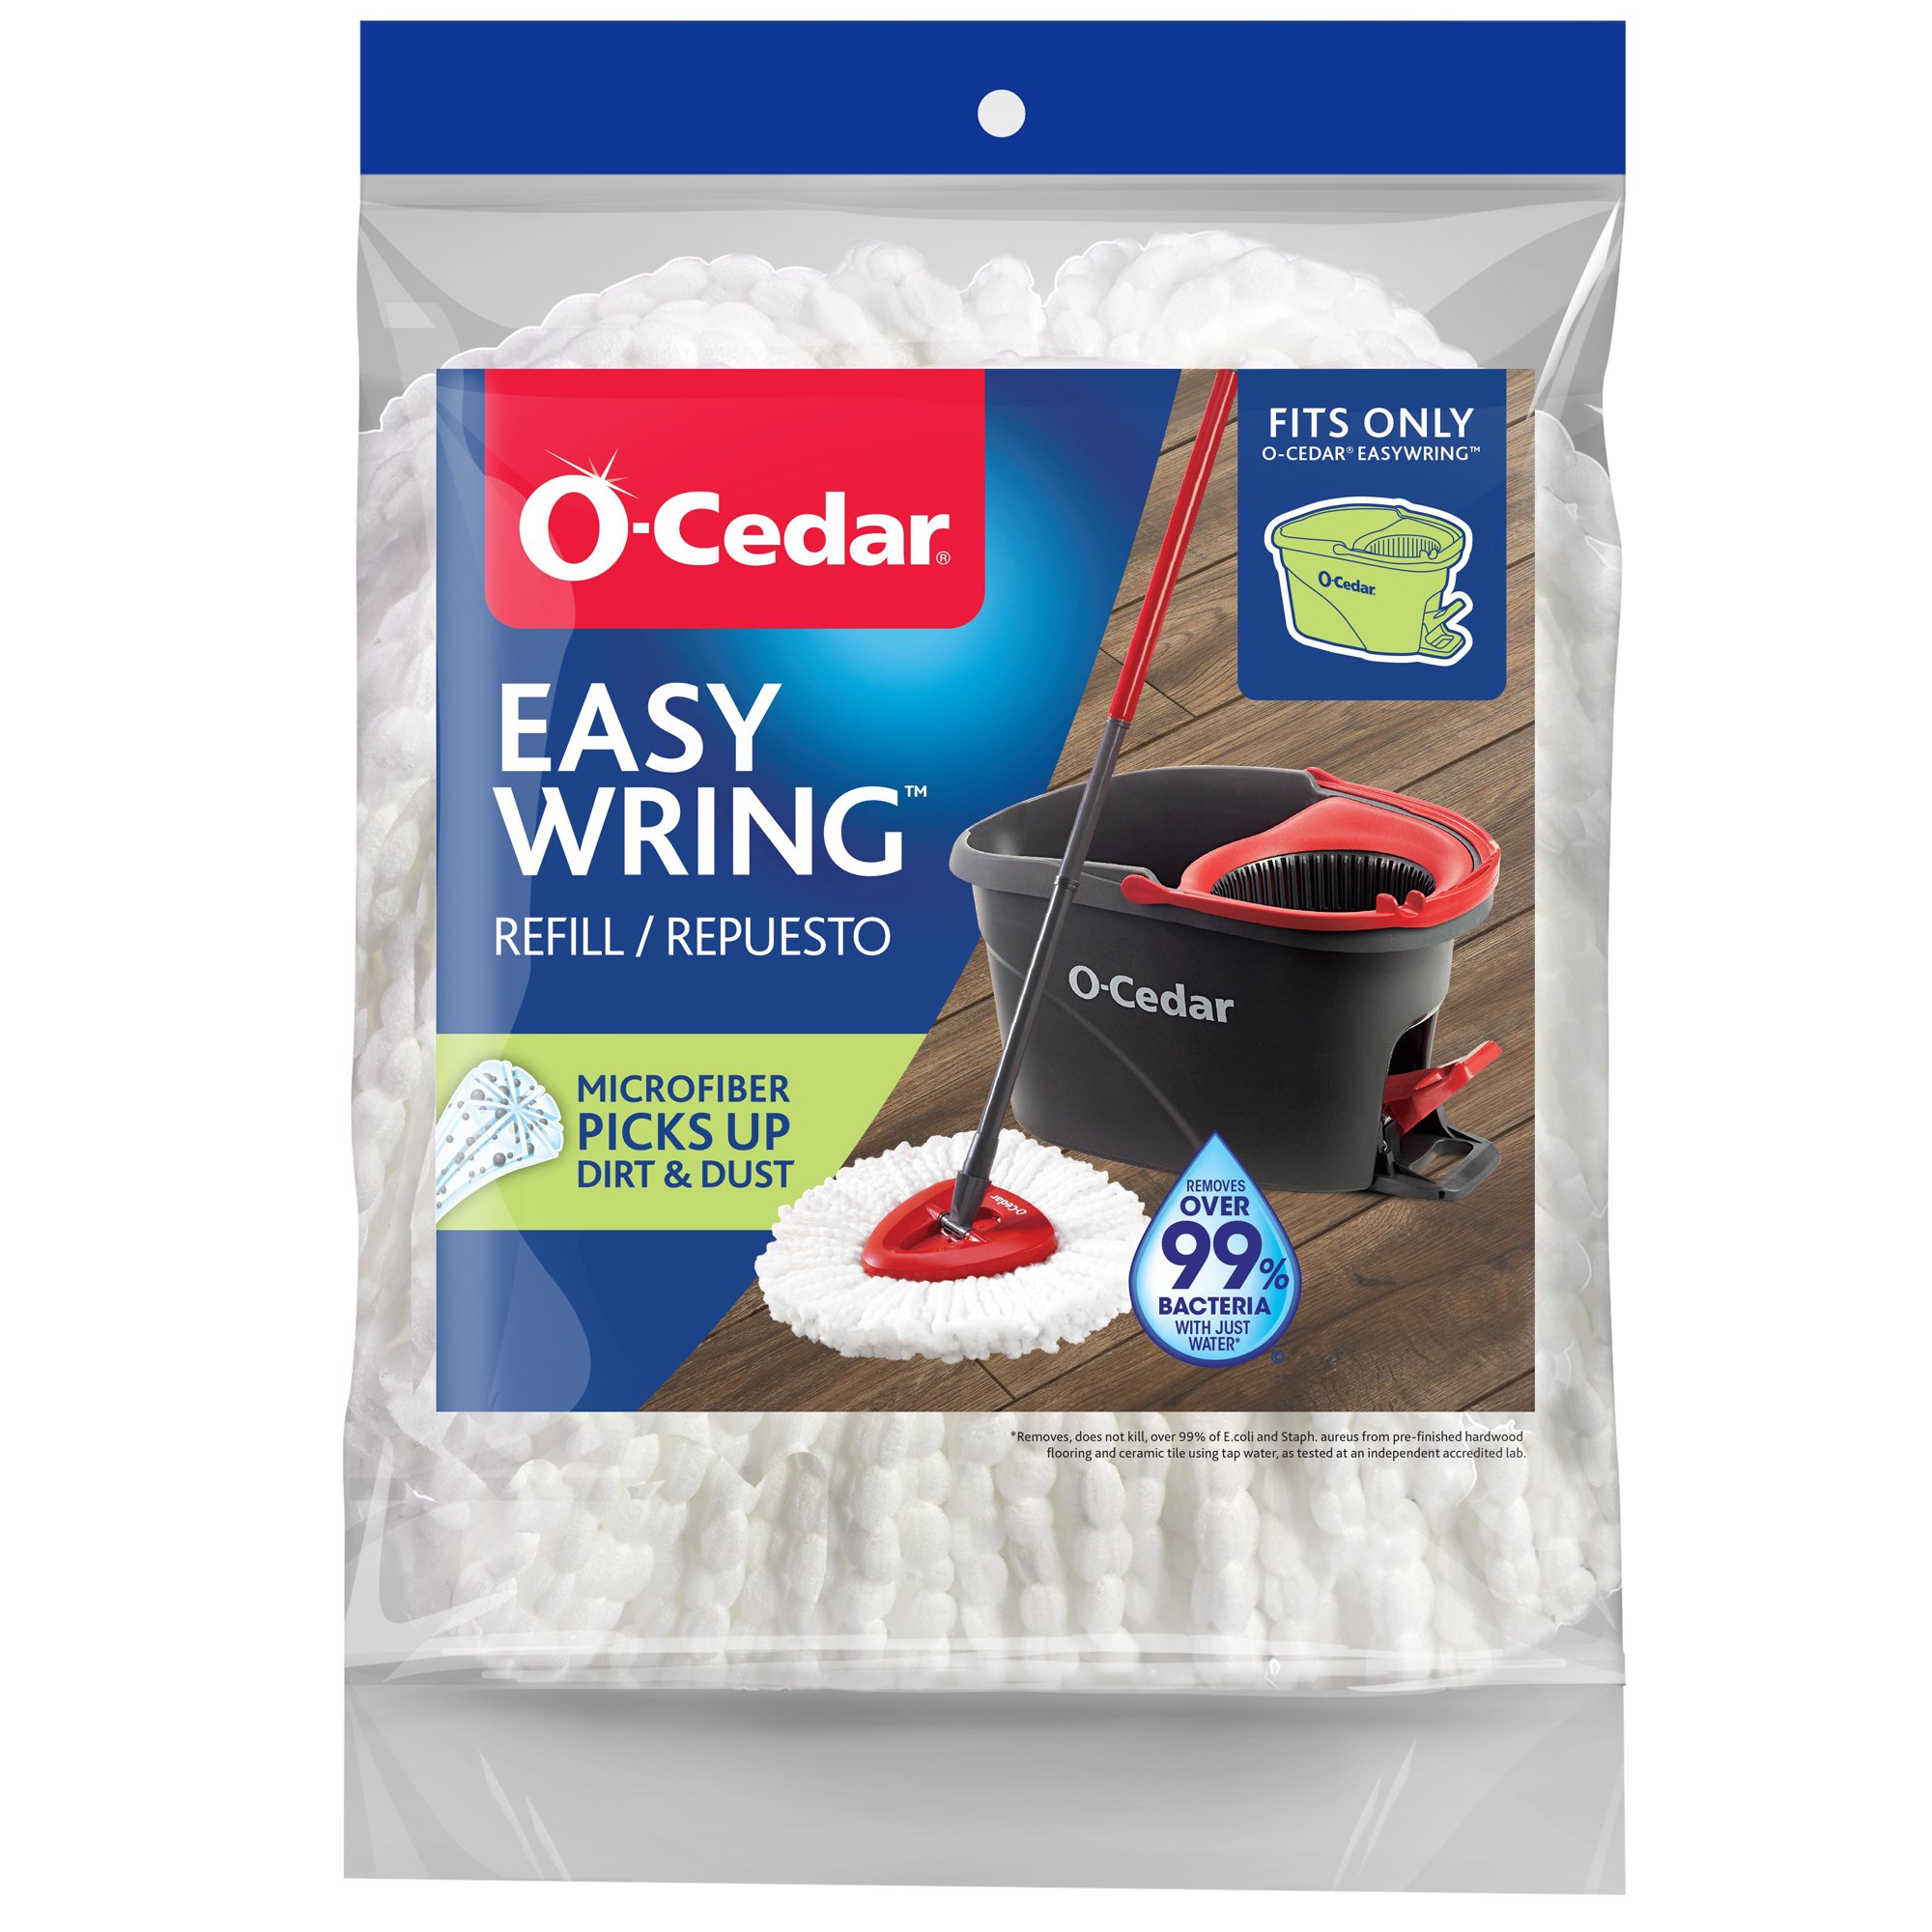 O-Cedar EasyWring Spin Mop with Bucket System +1 Extra Refill